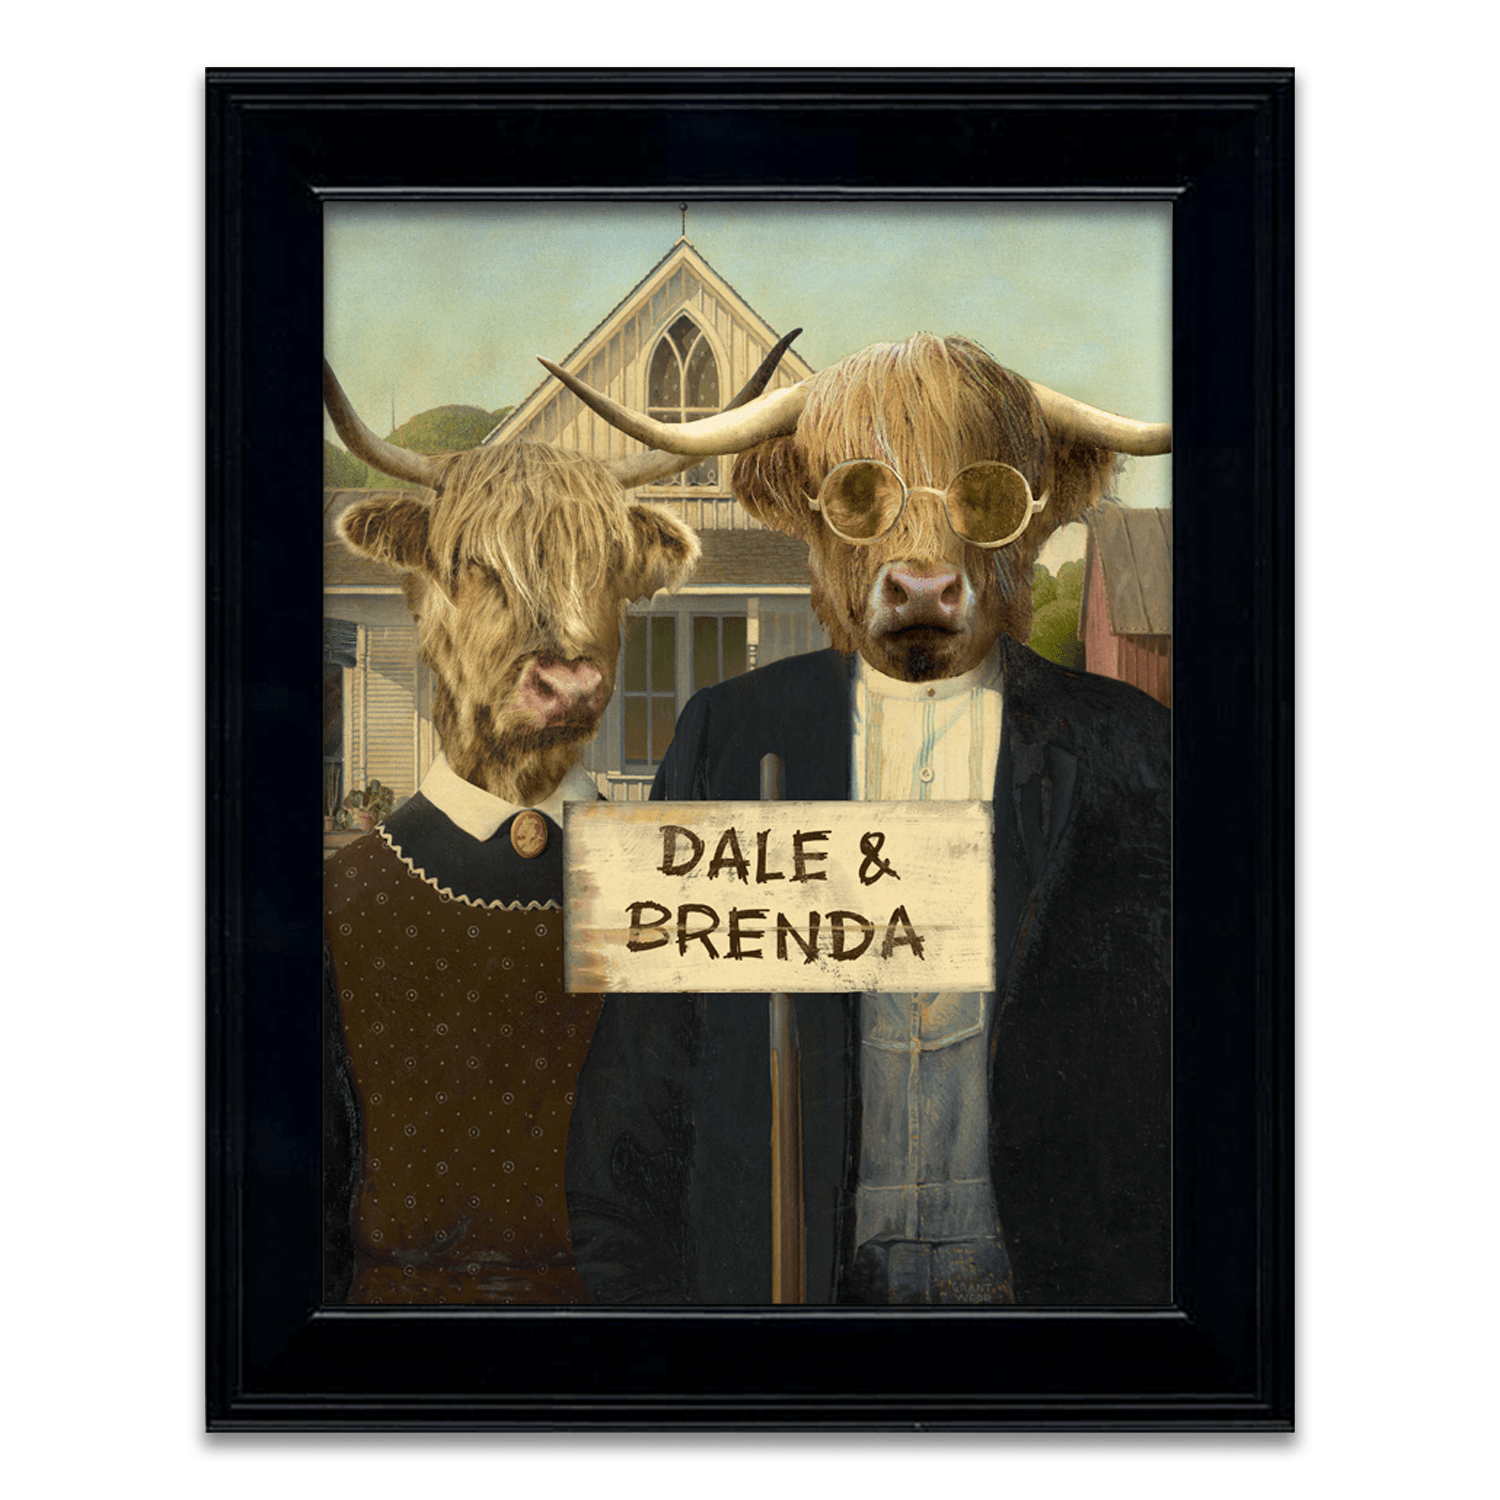 Adaptation of American Gothic with shaggy highland cows in the art personalized for you